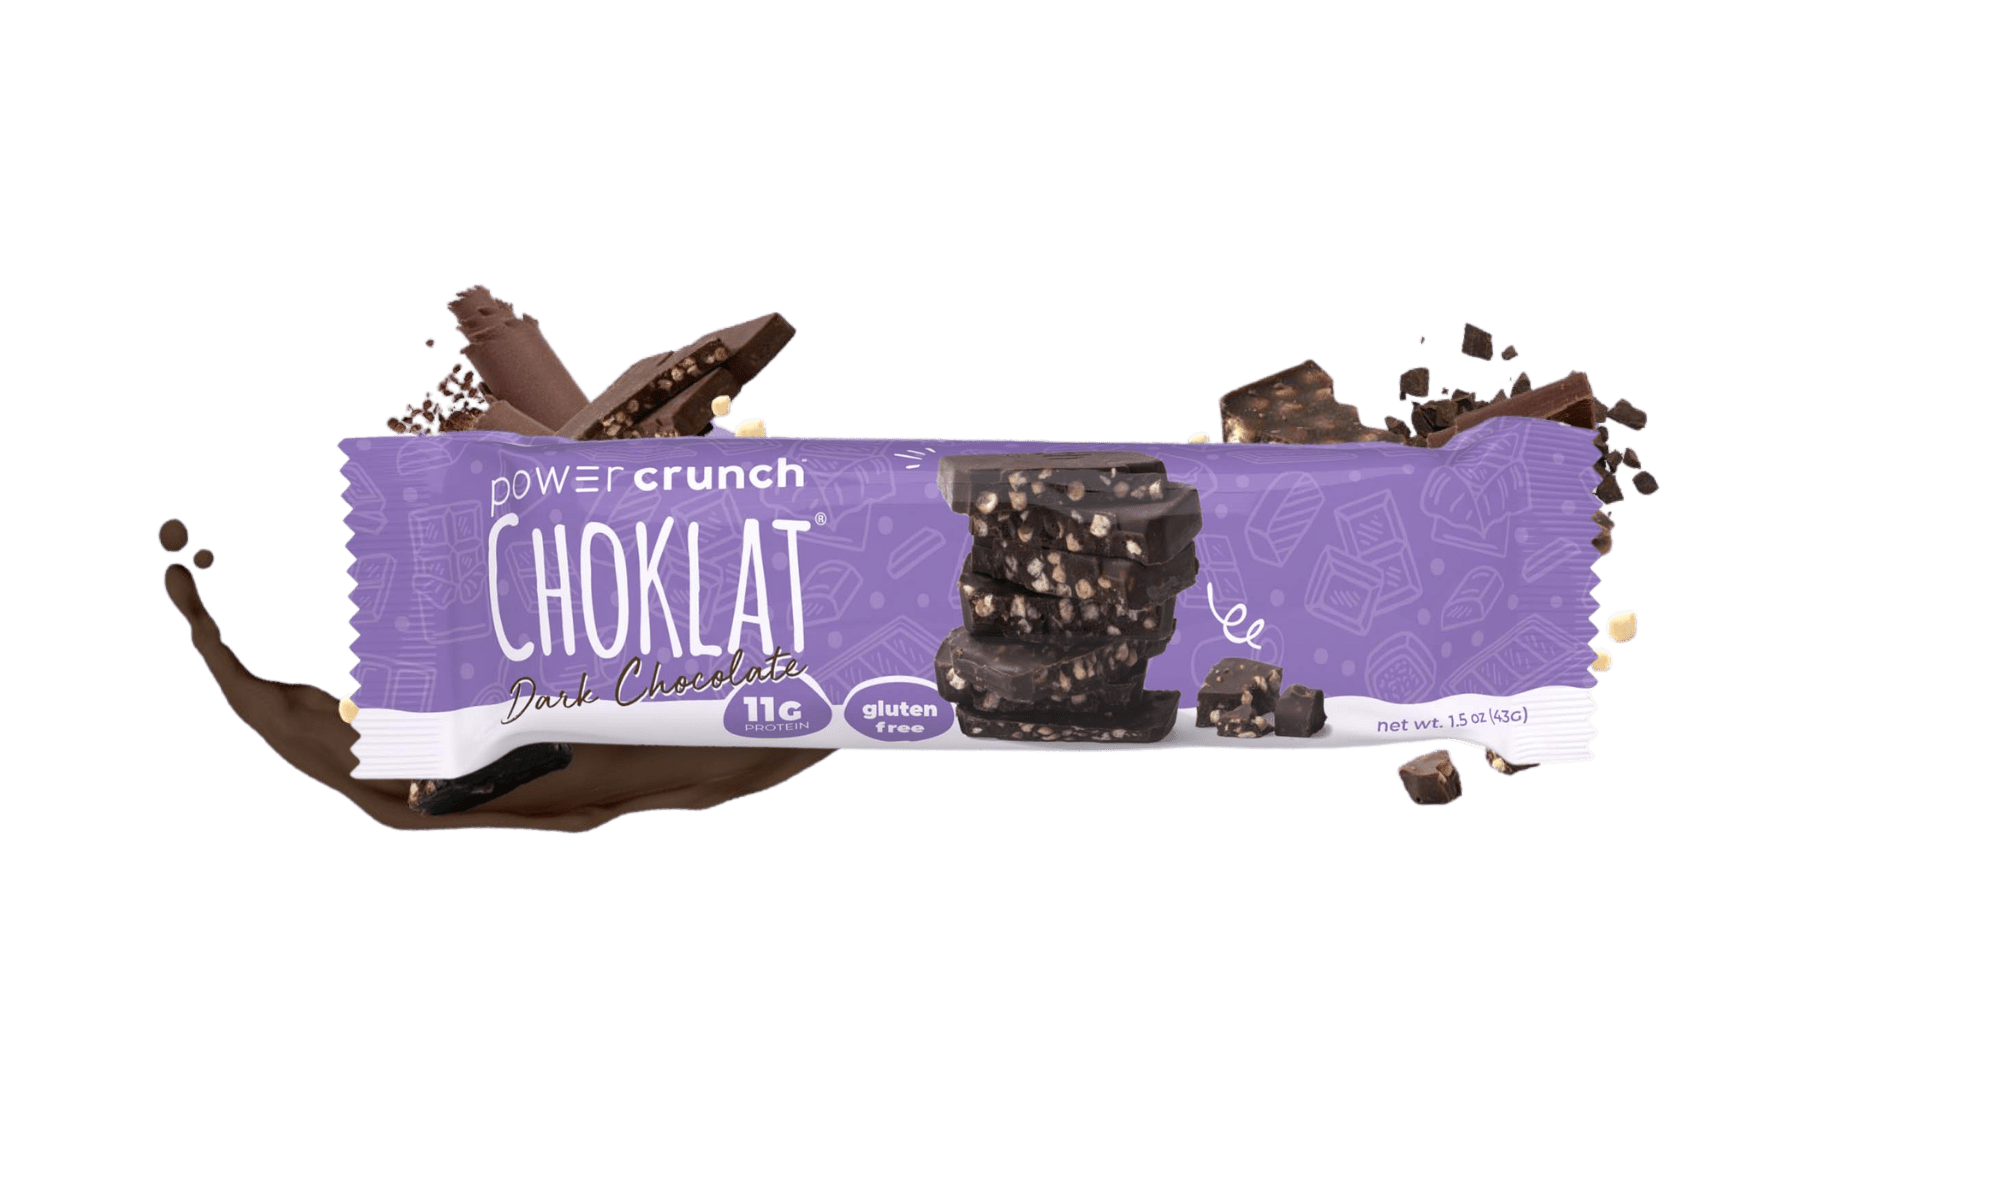 Power Crunch Choklat Dark Chocolate bars pictured with chocolate flavor explosion